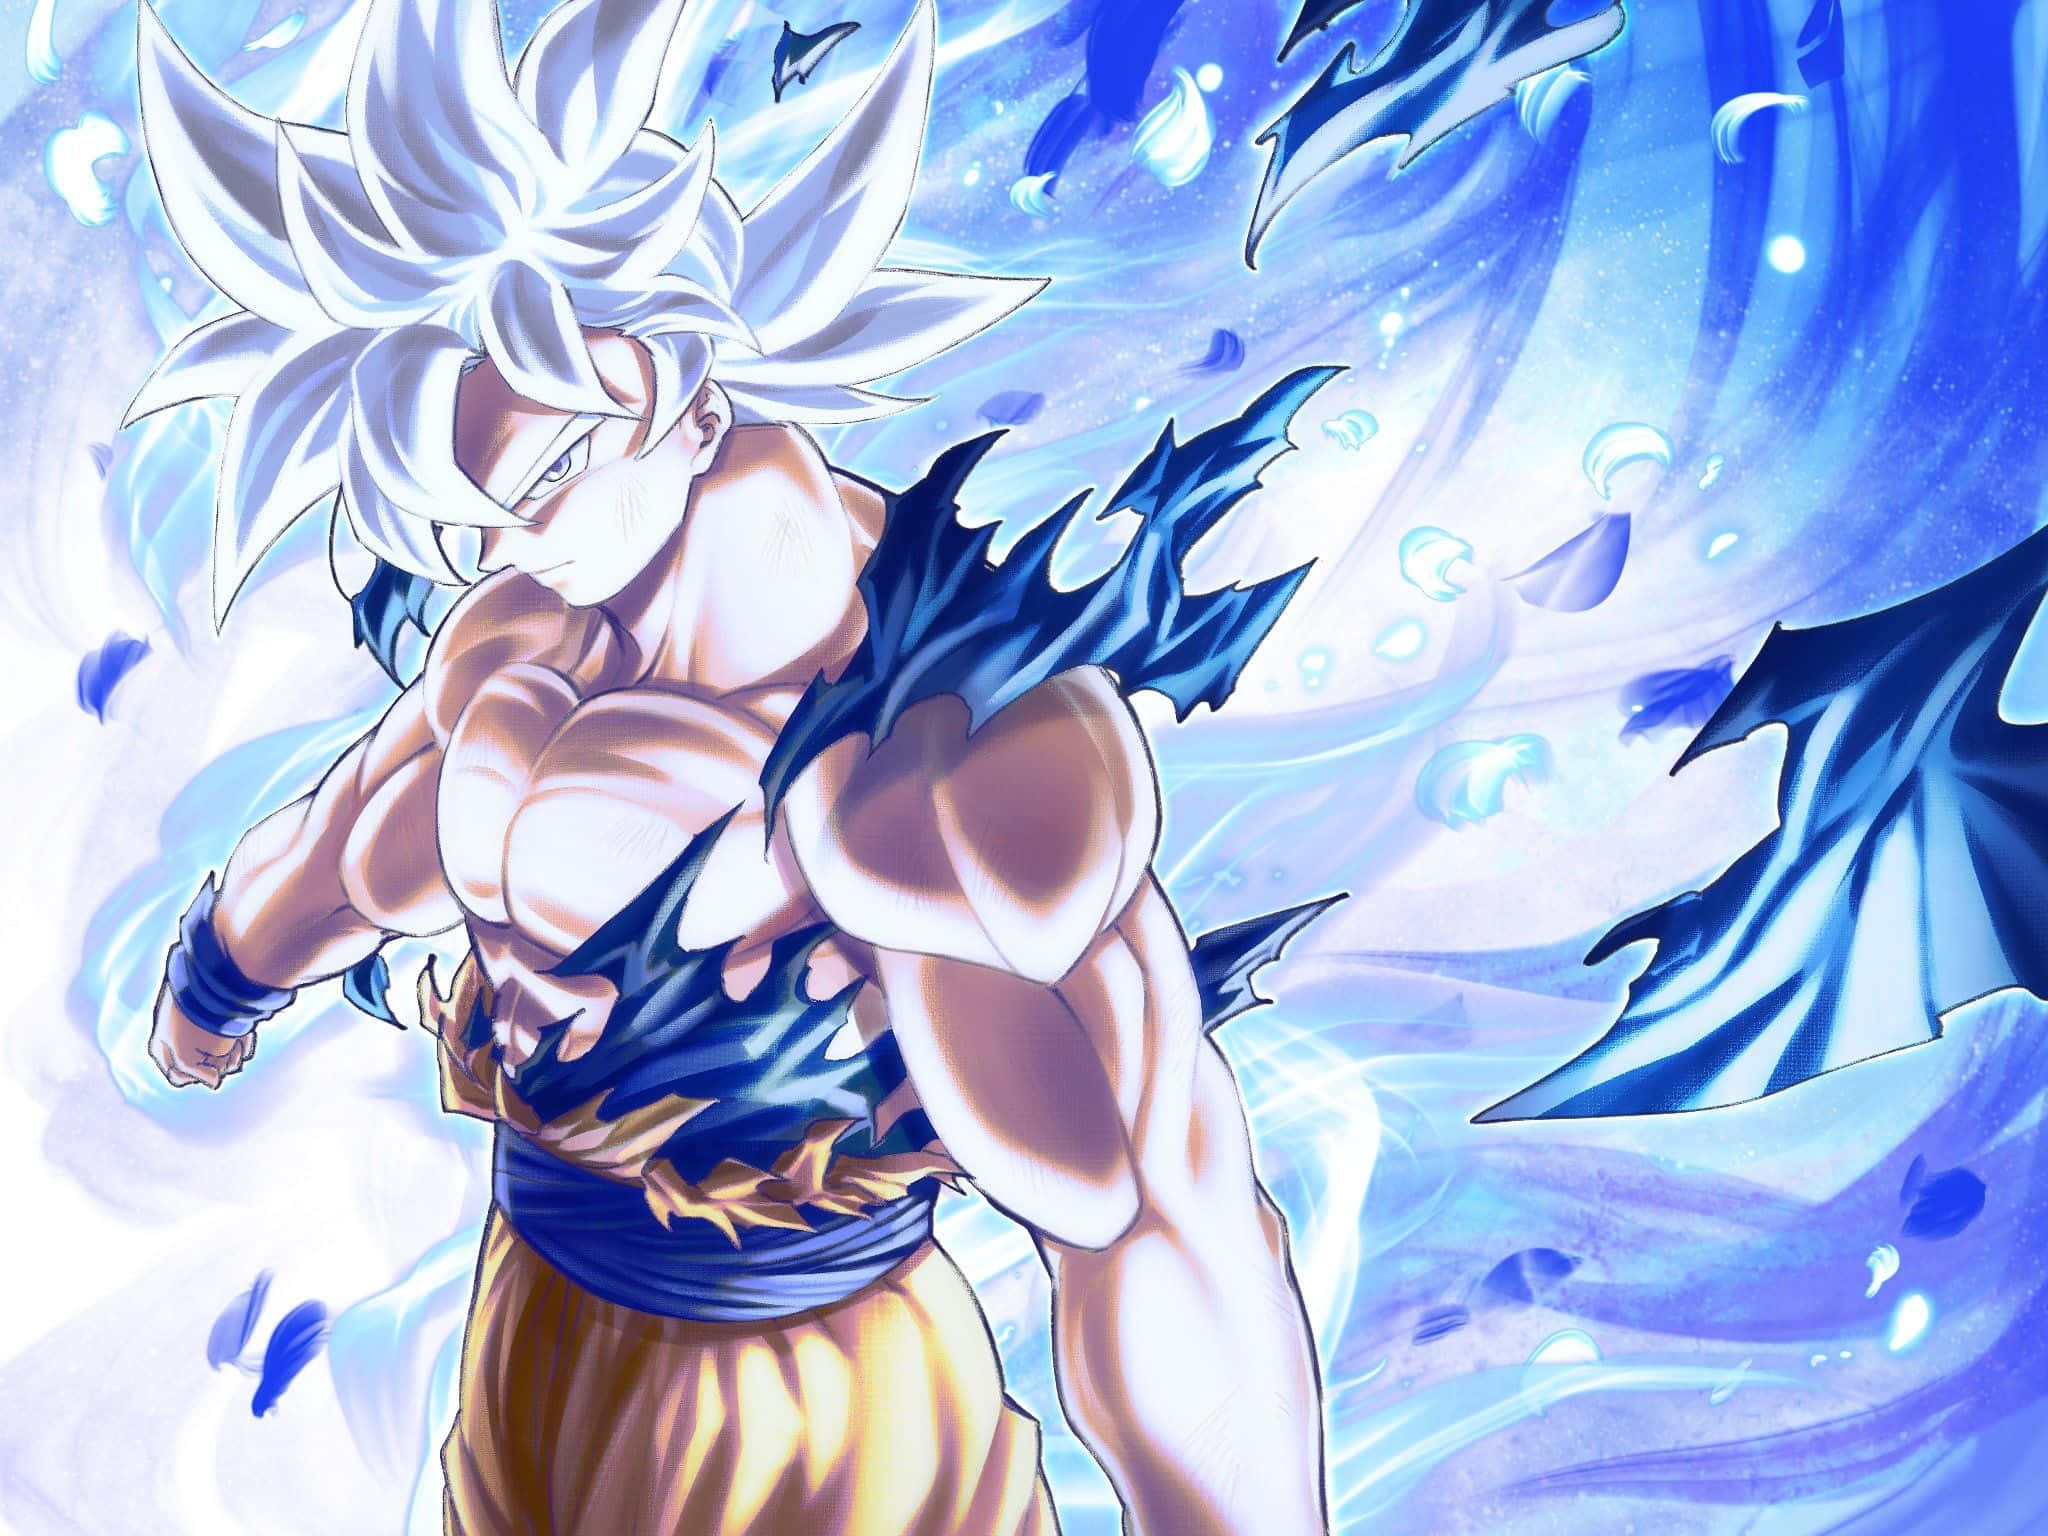 The powerful Mui Goku fighting in a mythical world Wallpaper